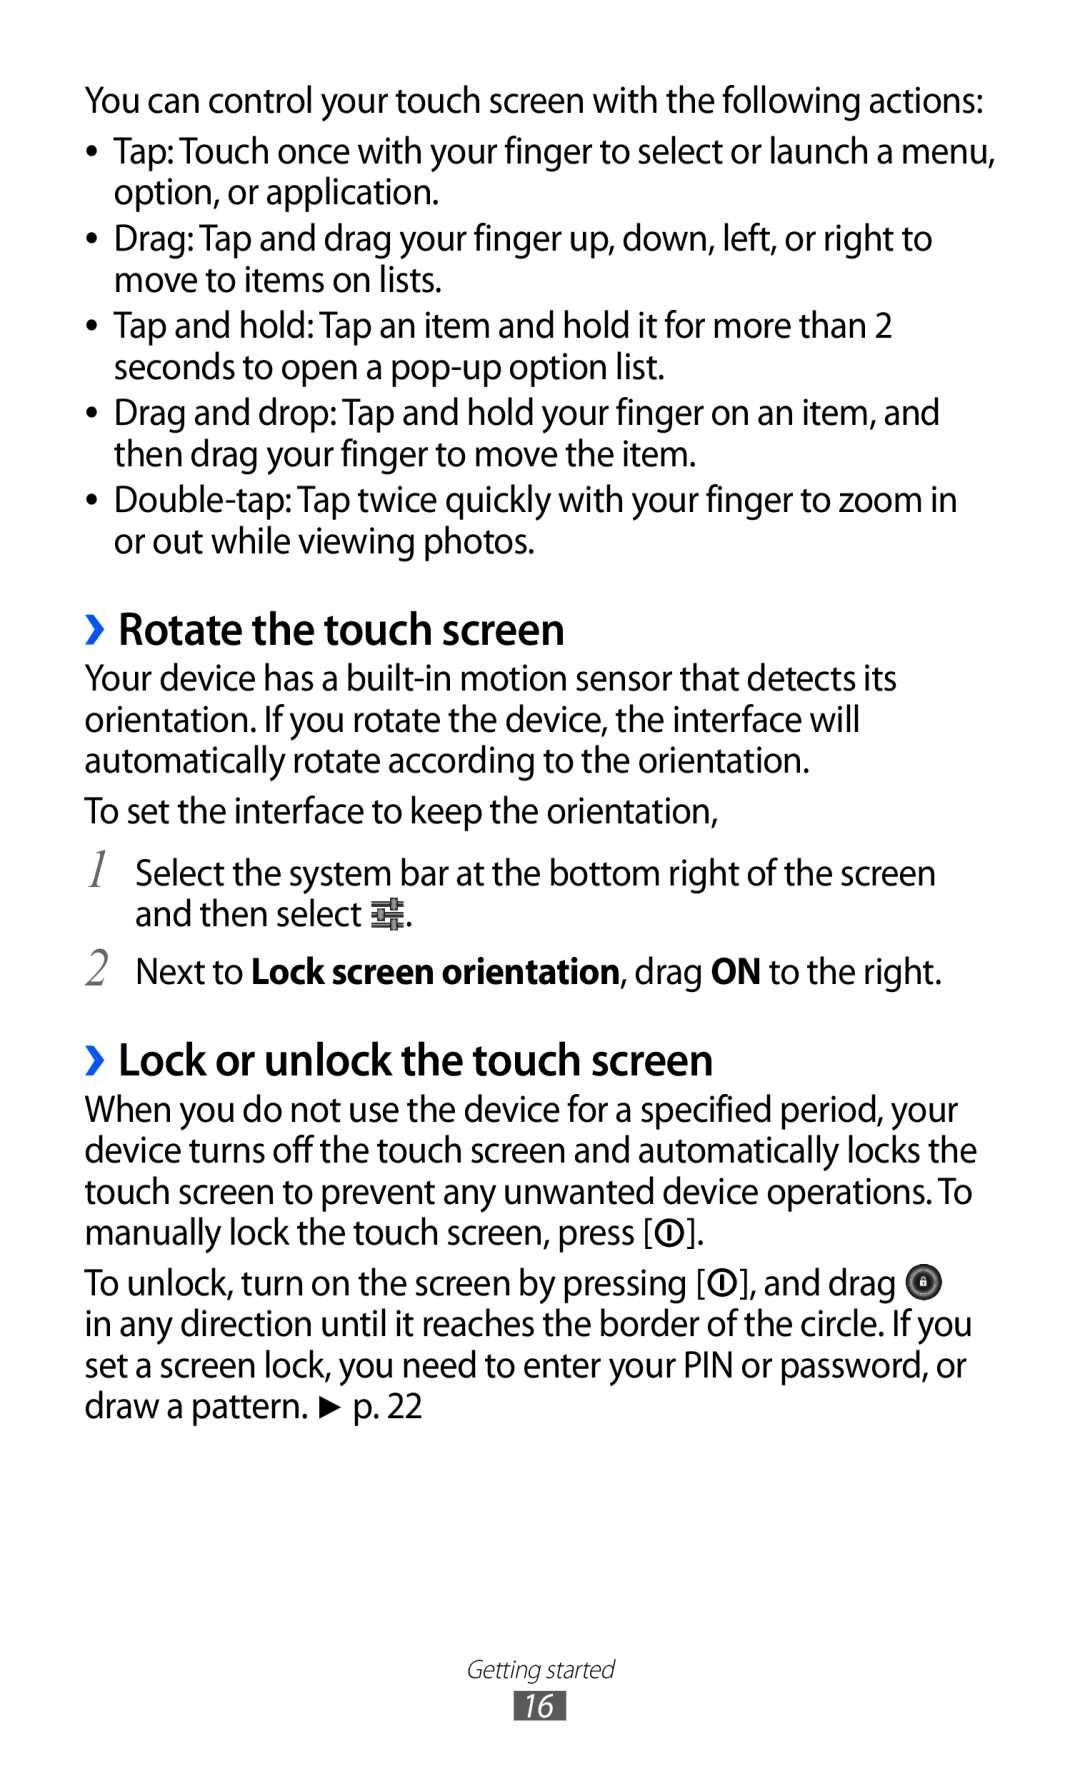 Samsung GT-P7510 user manual ››Rotate the touch screen, ››Lock or unlock the touch screen 